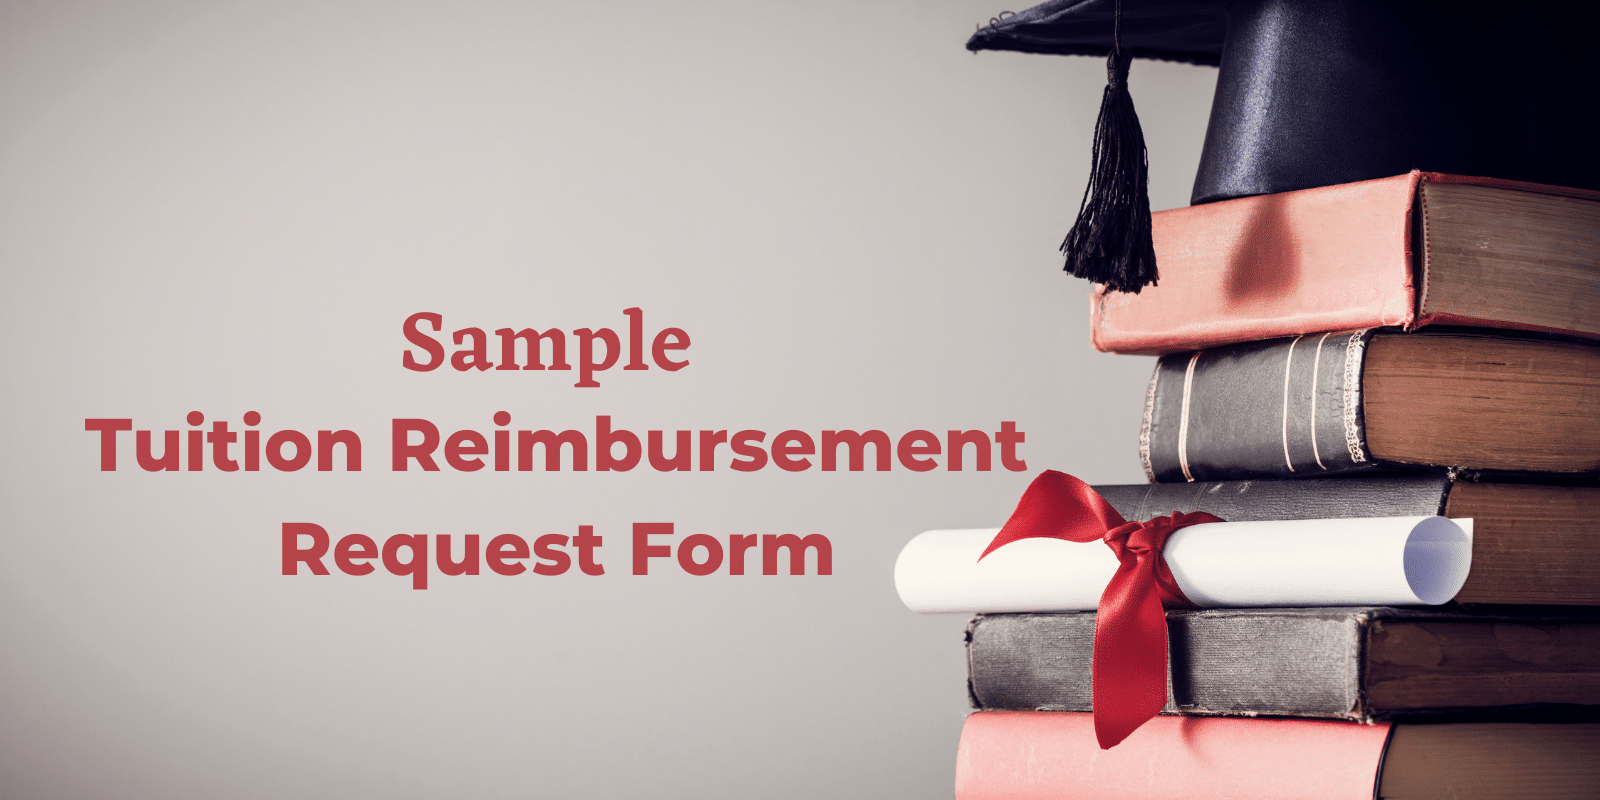 Sample Tuition Reimbursement Request Form – The Thriving Small Business